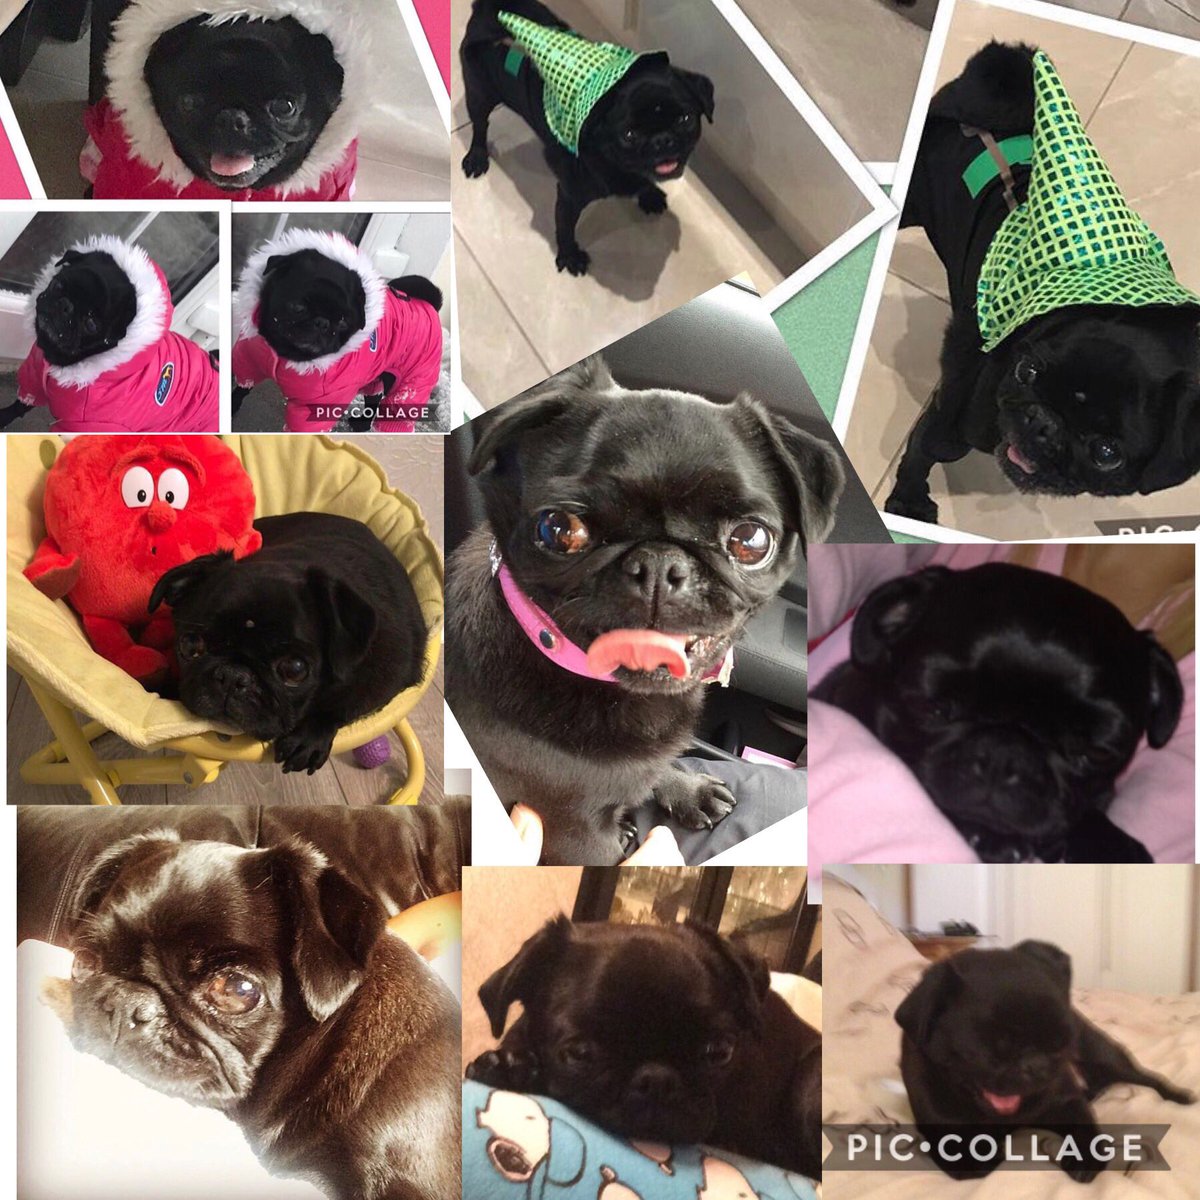 #LoveYourPetDay an that I do 💕 #Mimi #pug #minipug #mypig #13yearsyoung